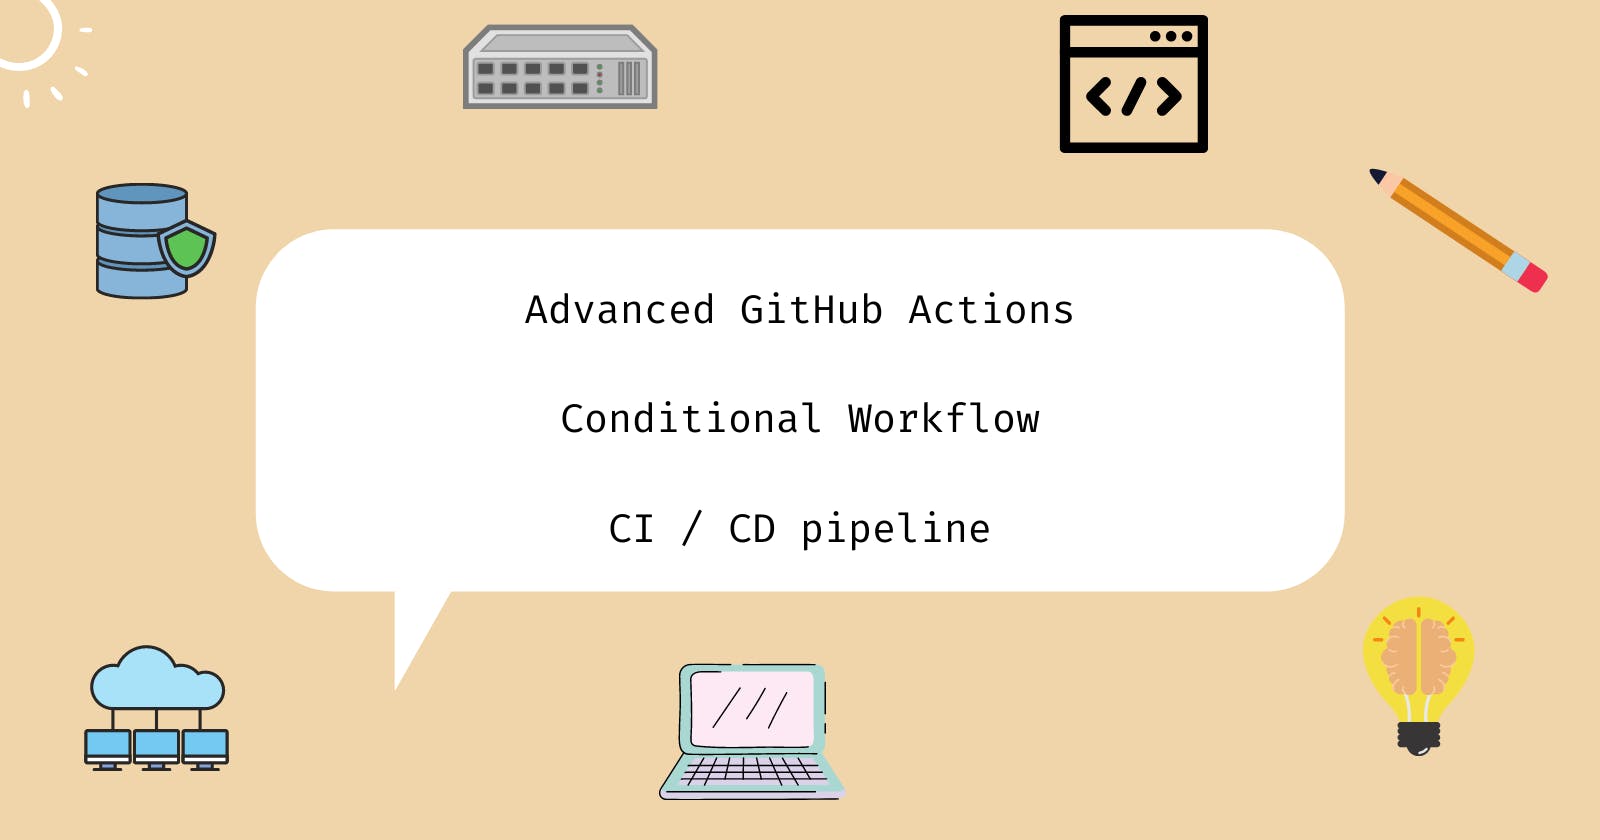 Advanced GitHub Actions - Conditional Workflow ❓